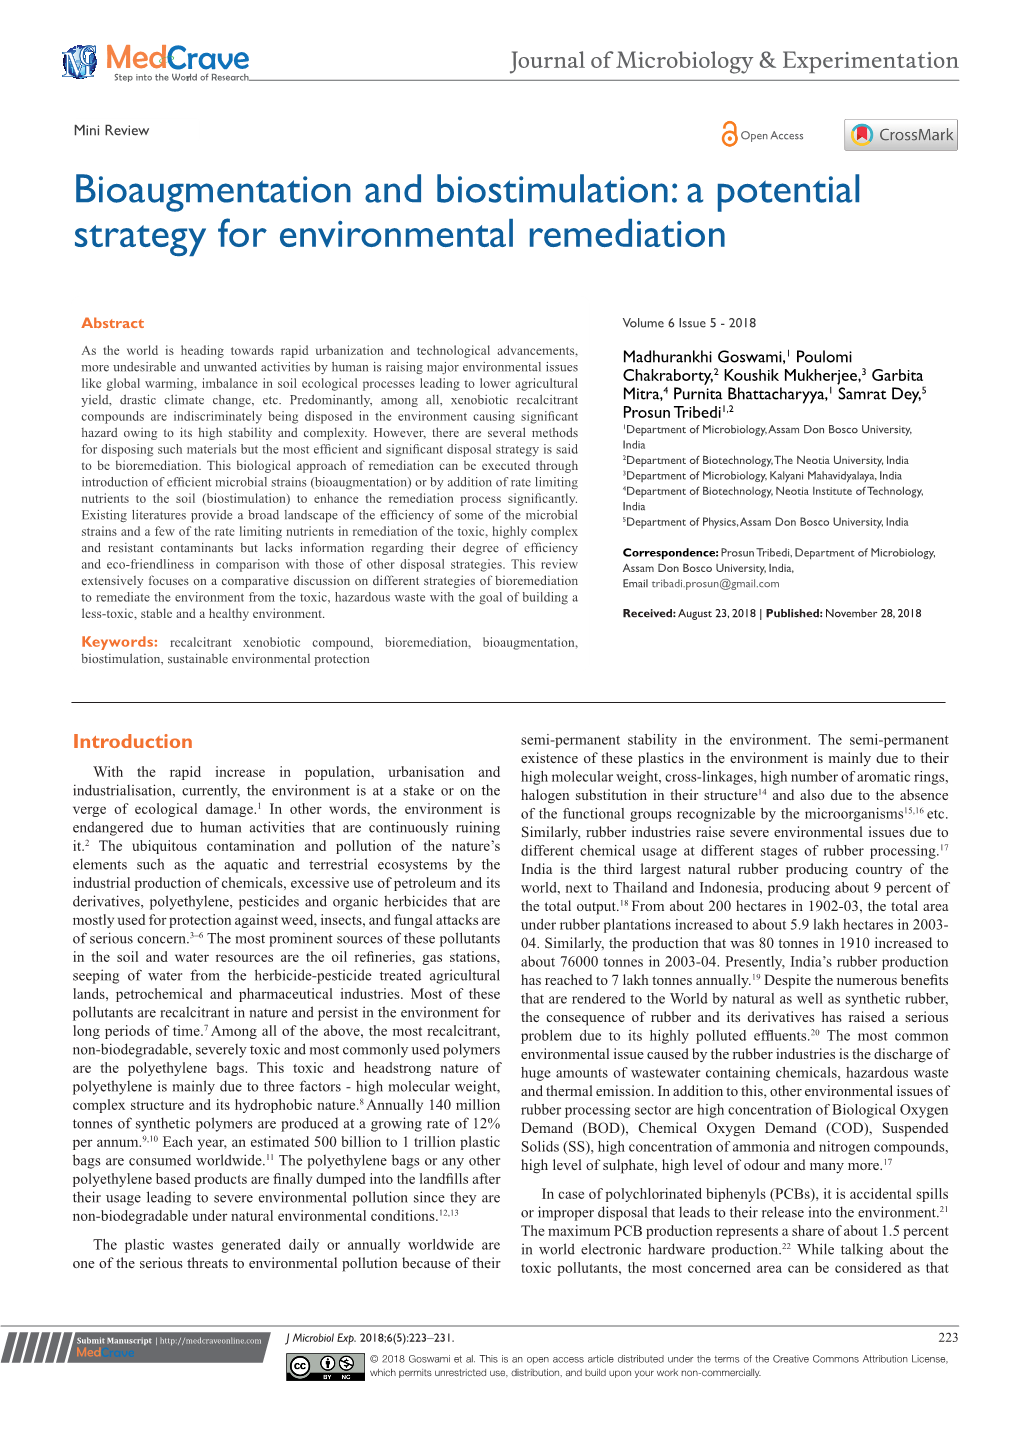 Bioaugmentation and Biostimulation: a Potential Strategy for Environmental Remediation